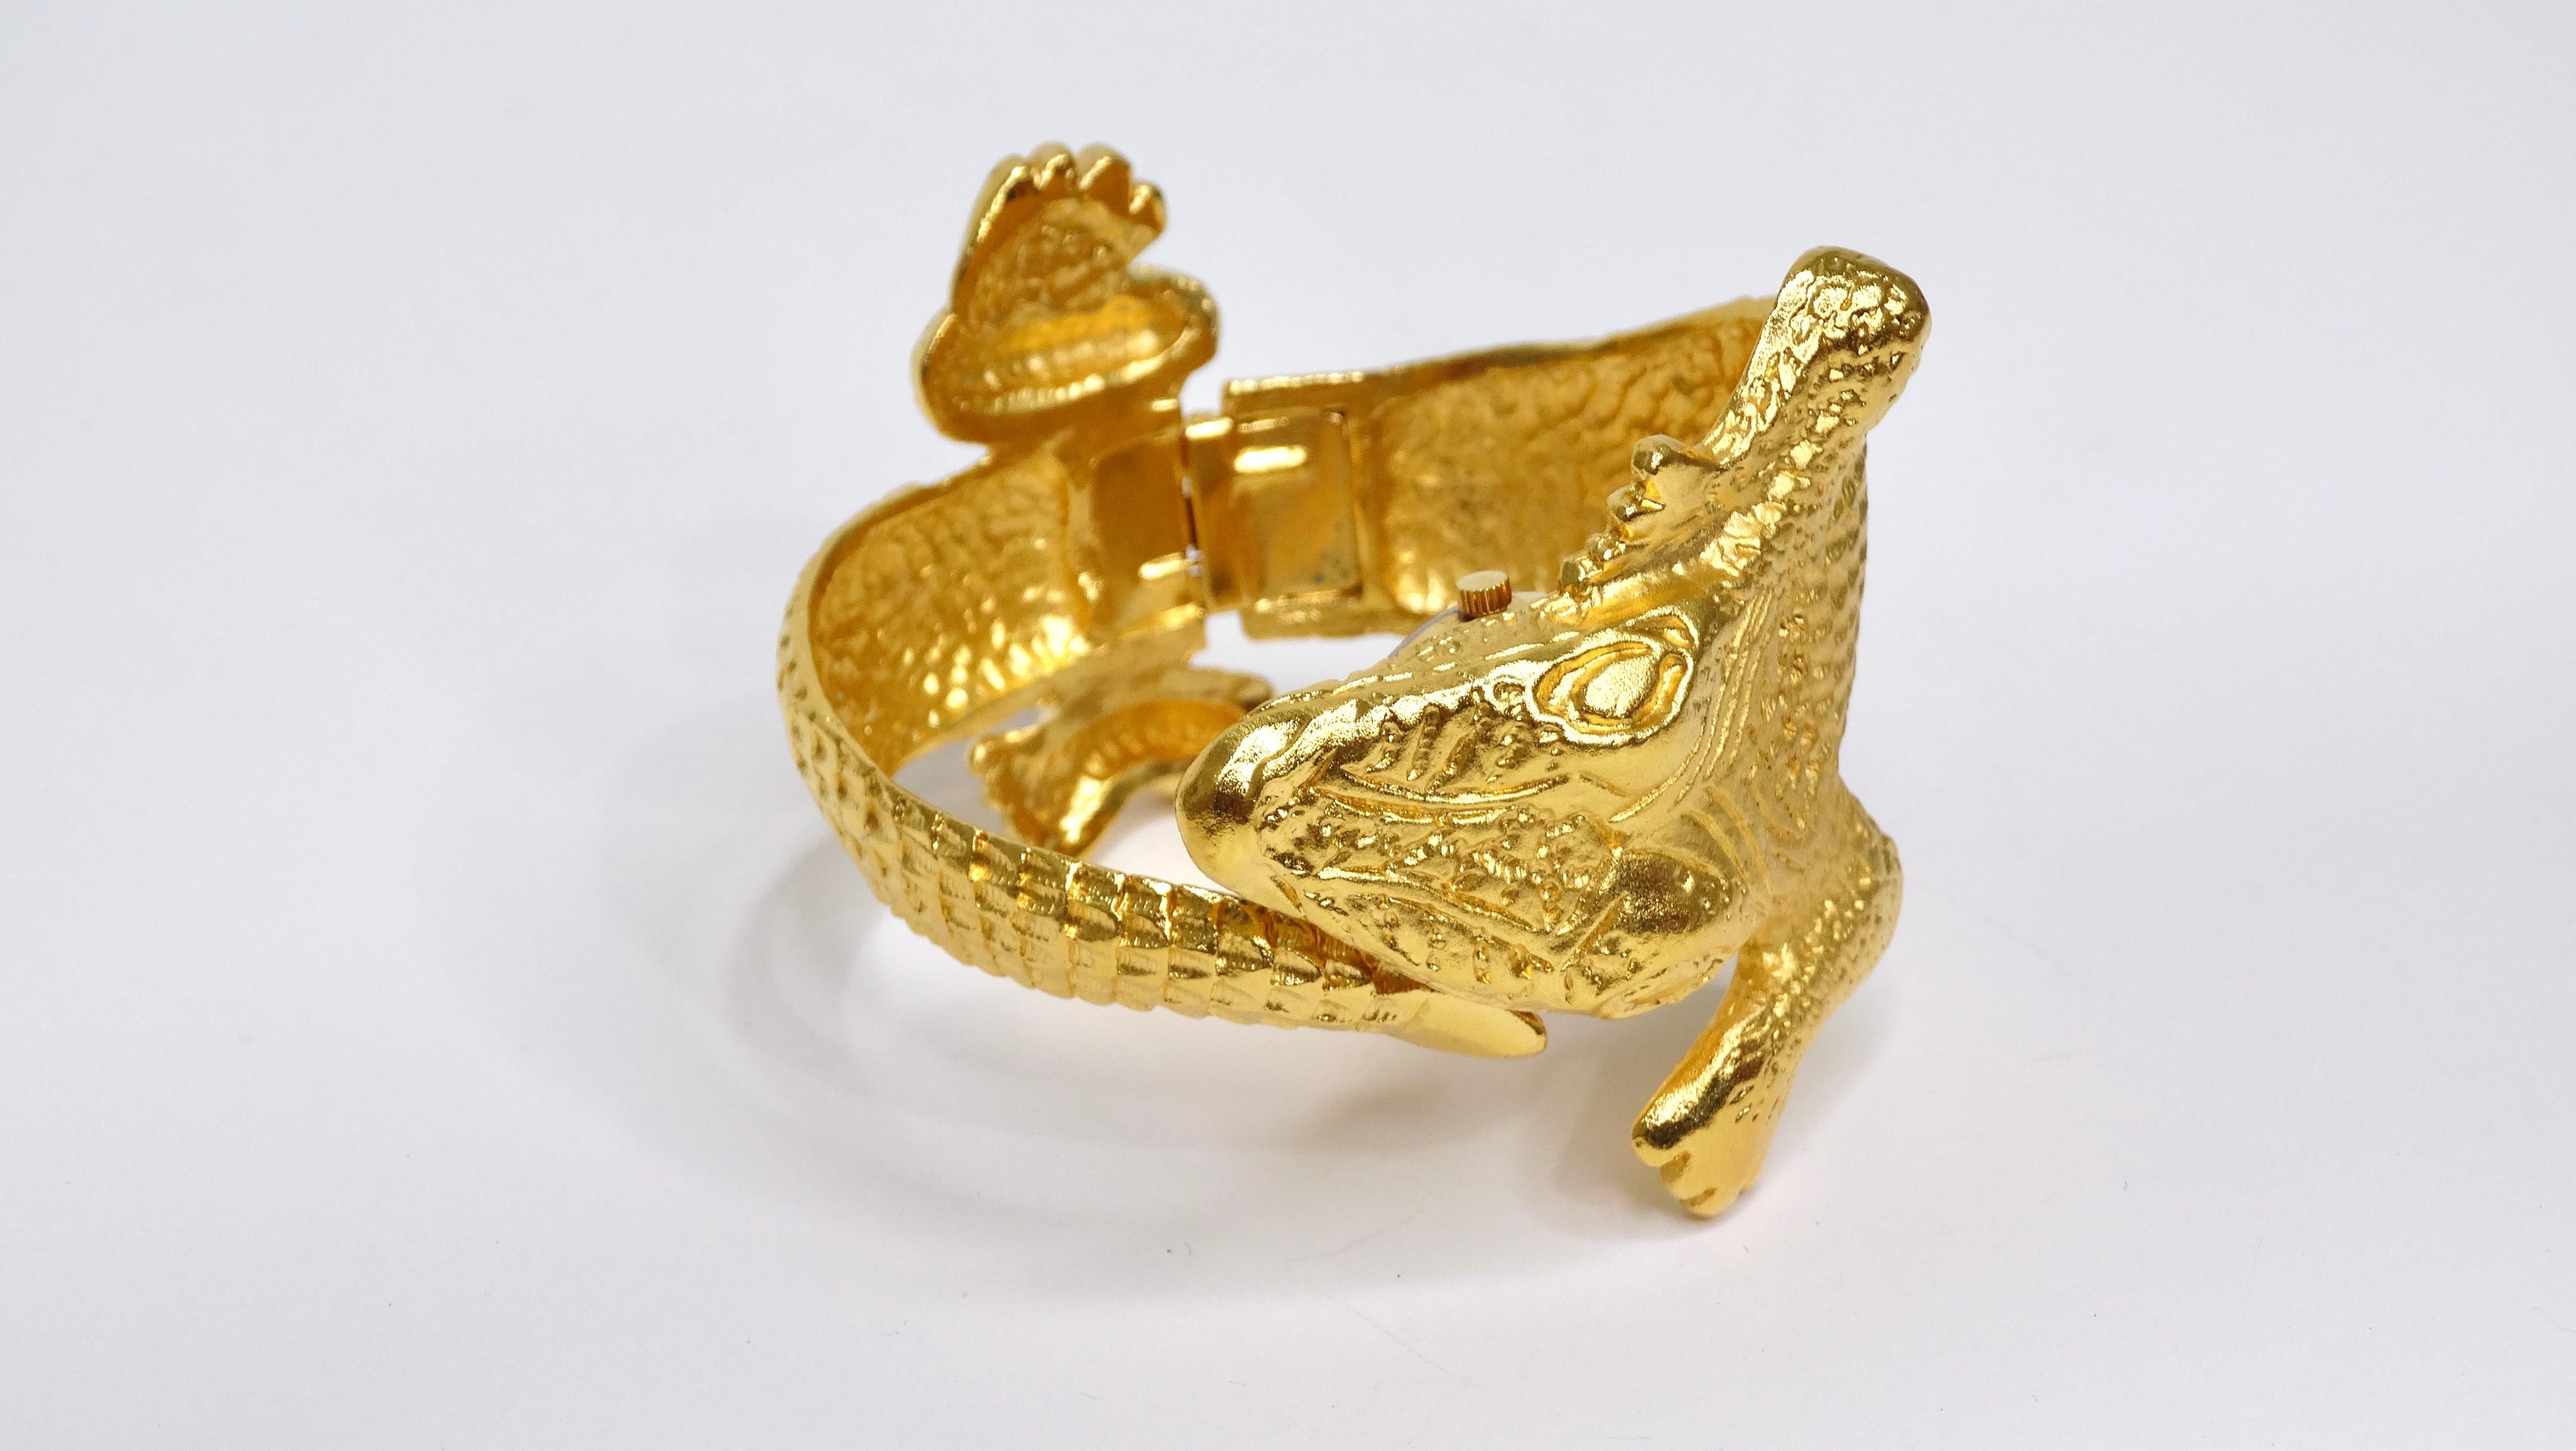 Kenneth Lane is known for his interesting and dramatic designs. This bracelet does just that. The bracelet depicts a full 3D body and head of an alligator in a radiant and rich gold and when pulled apart reveals a beautiful hidden stainless steel